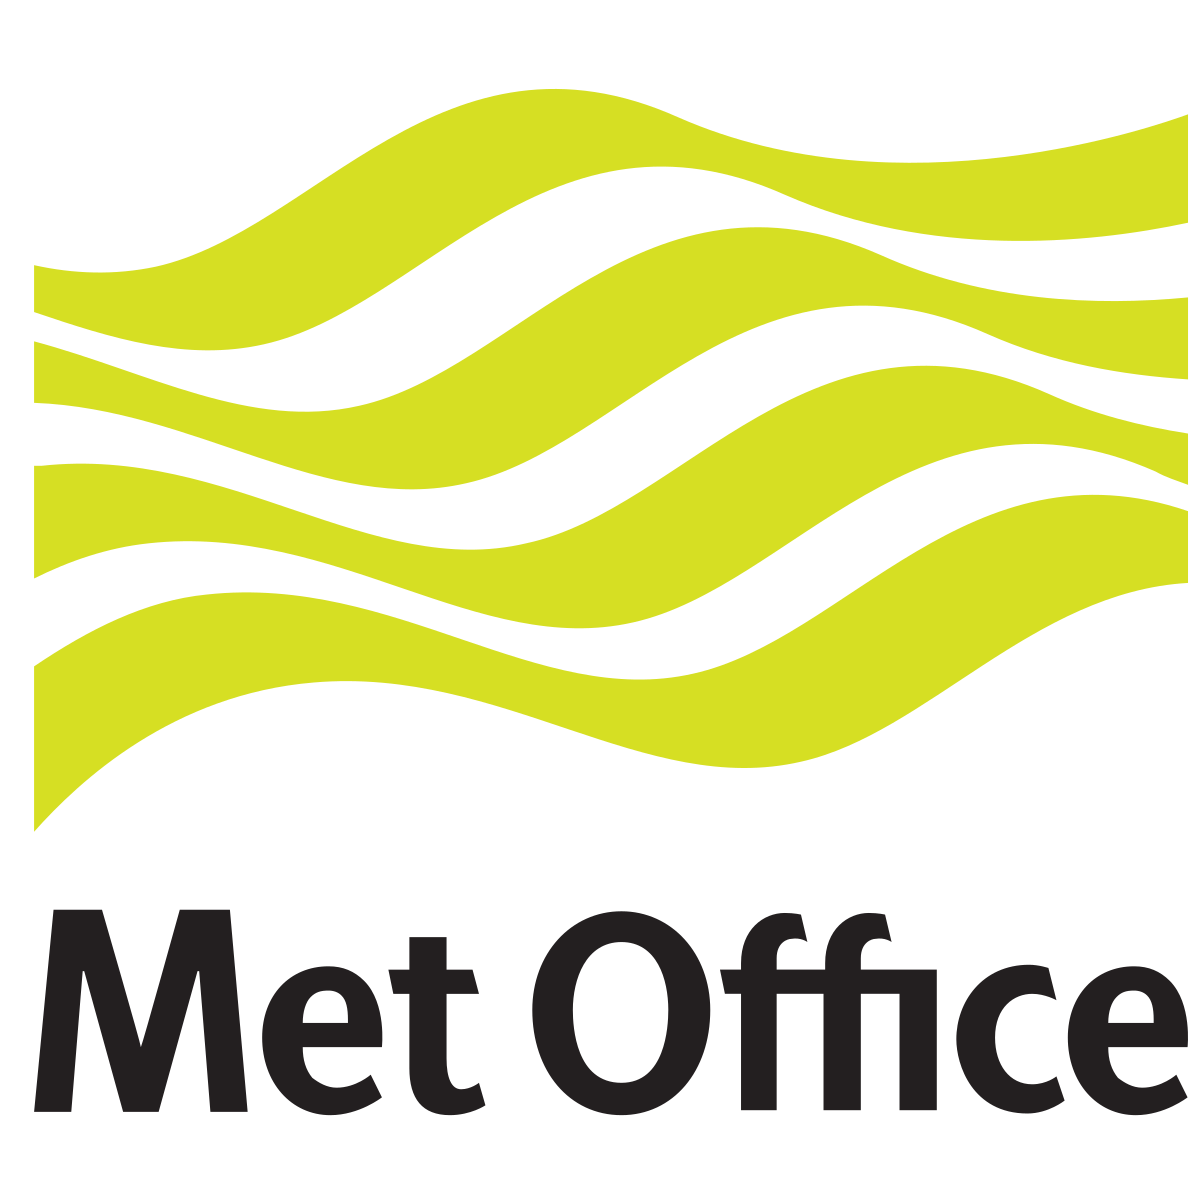 The Meteorological Office